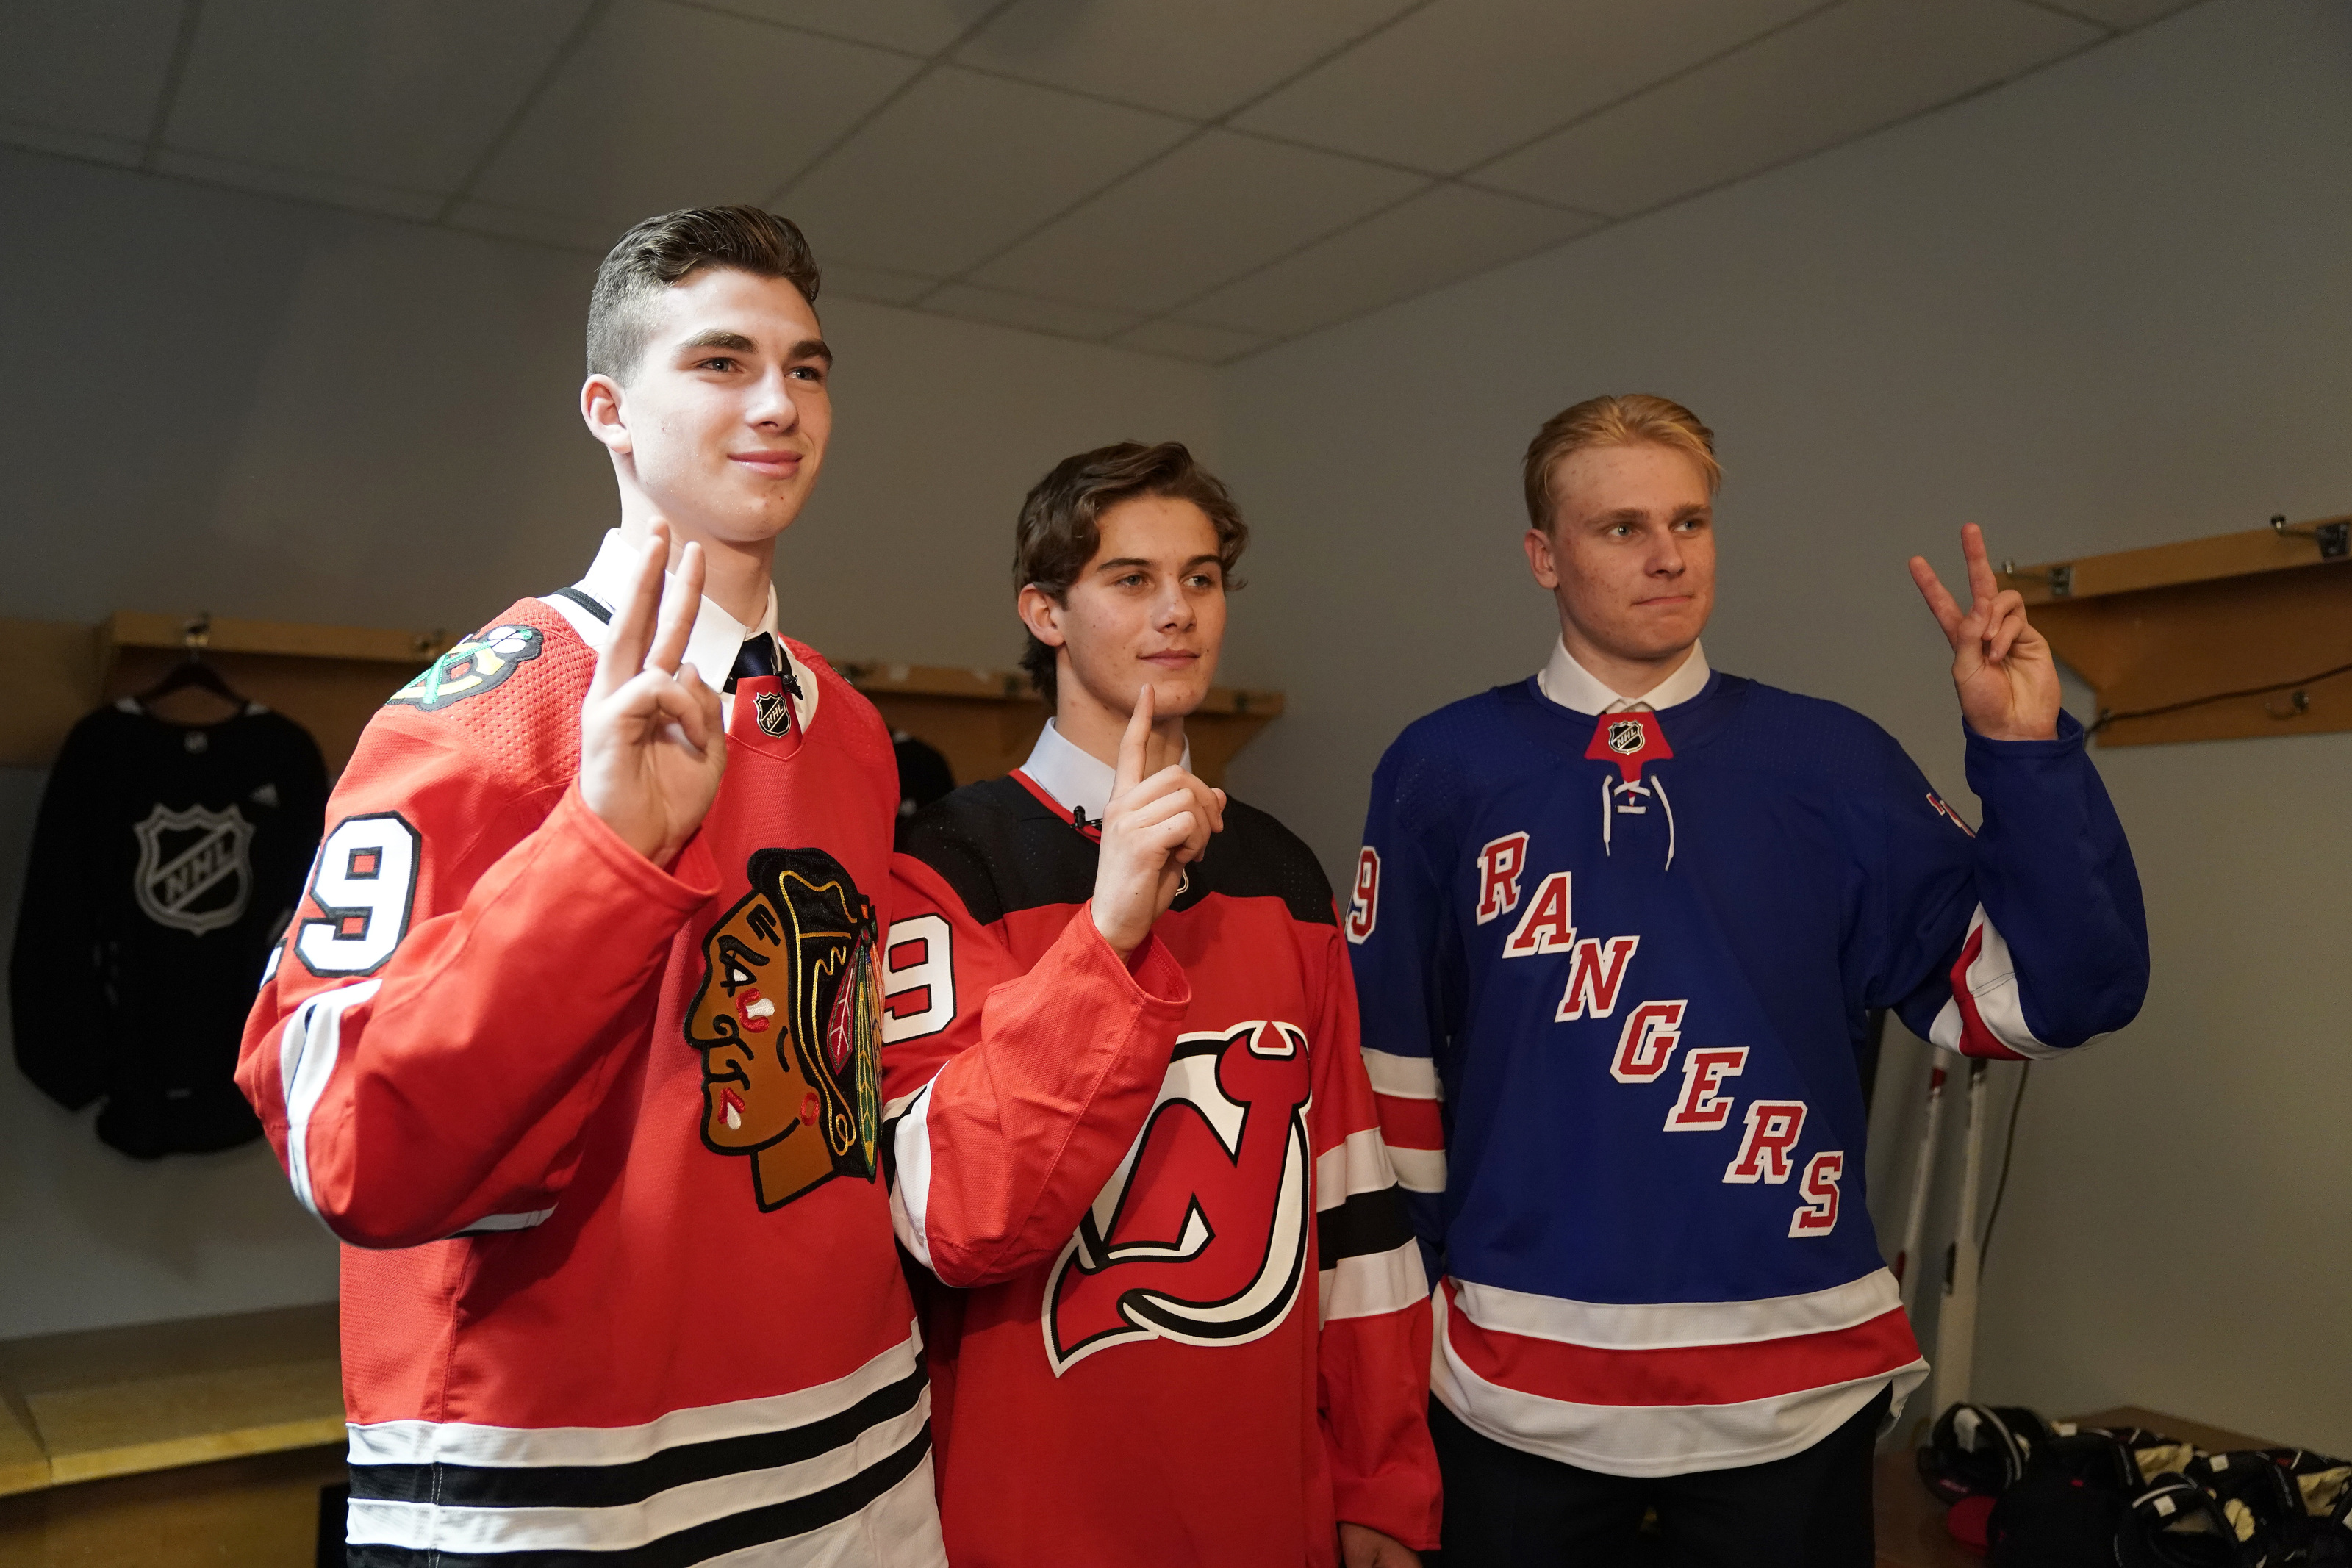 Metro North: The Devils, Rangers, and Islanders Are Ready to